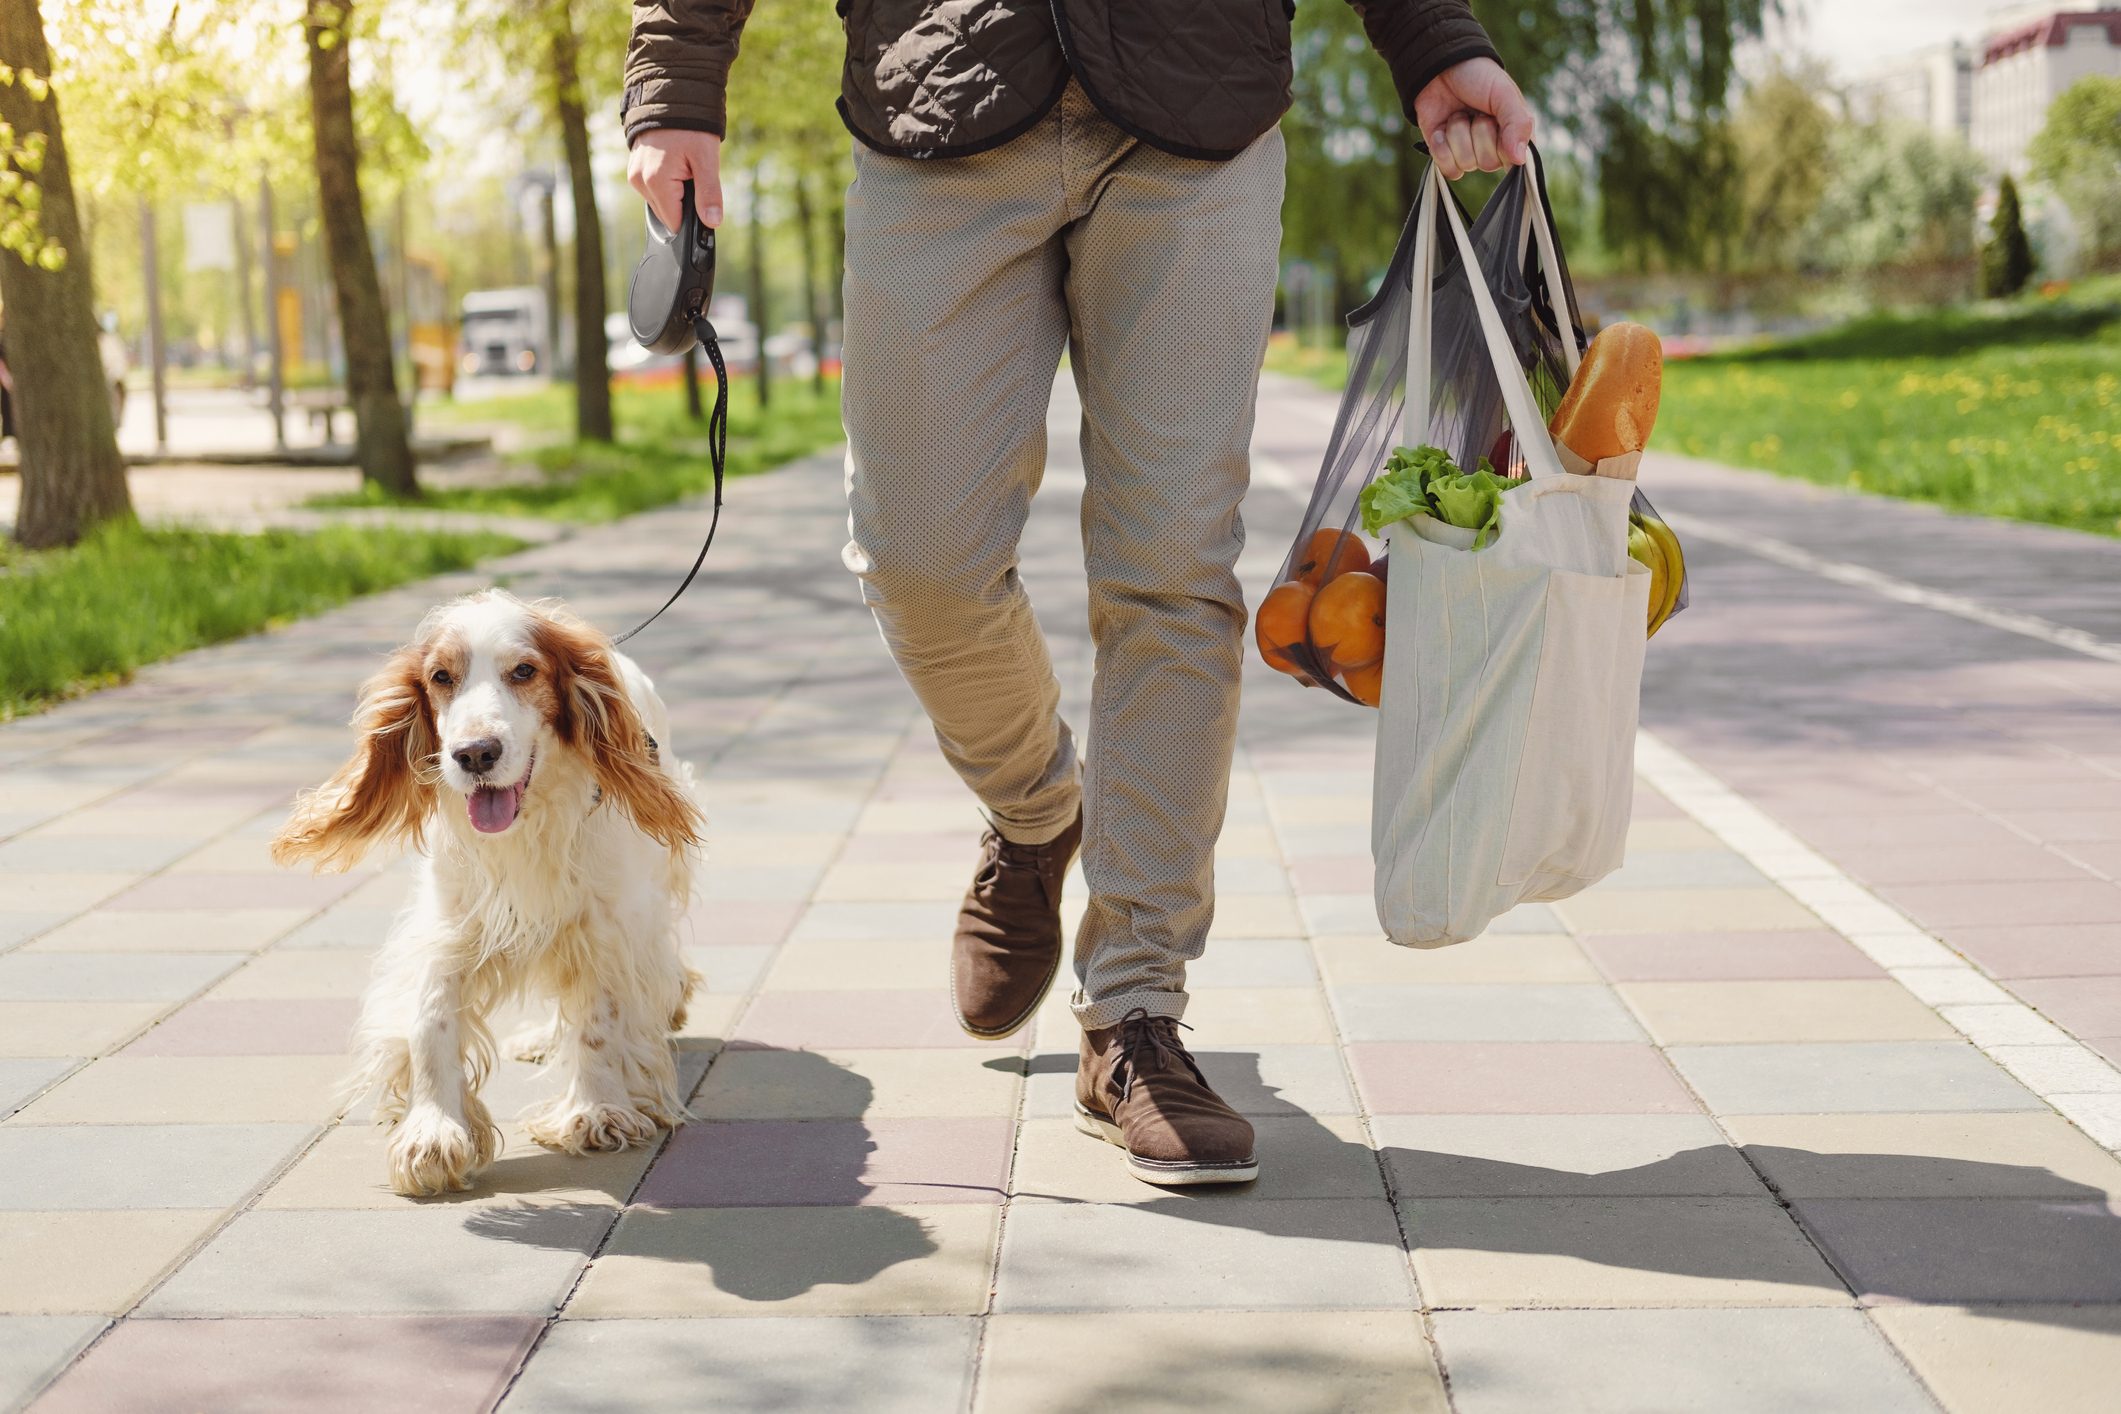 Dog walks next to a man with bag of groceries.